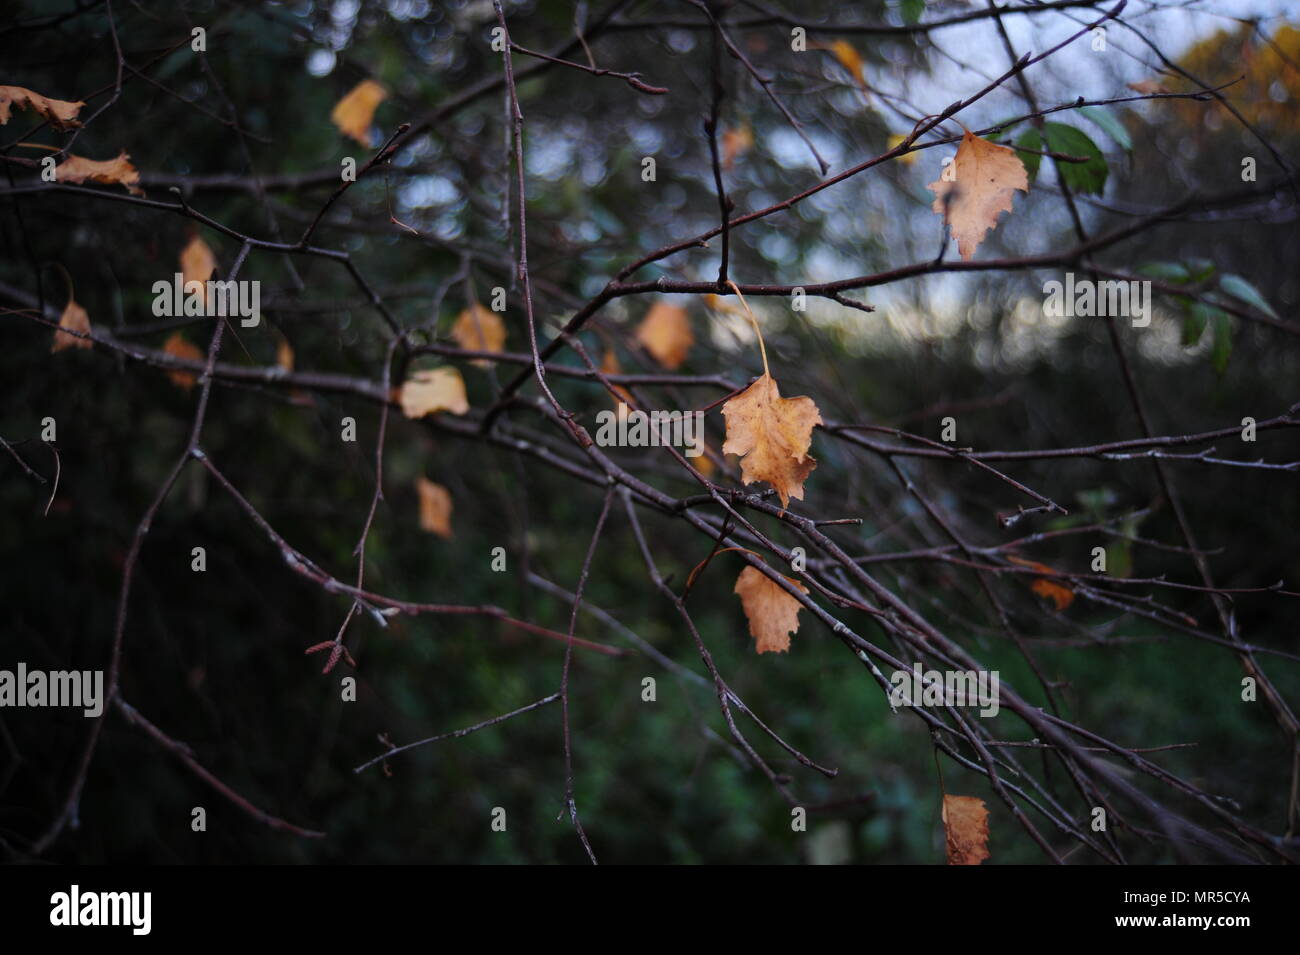 Background of birch branches and autumn leaves Stock Photo